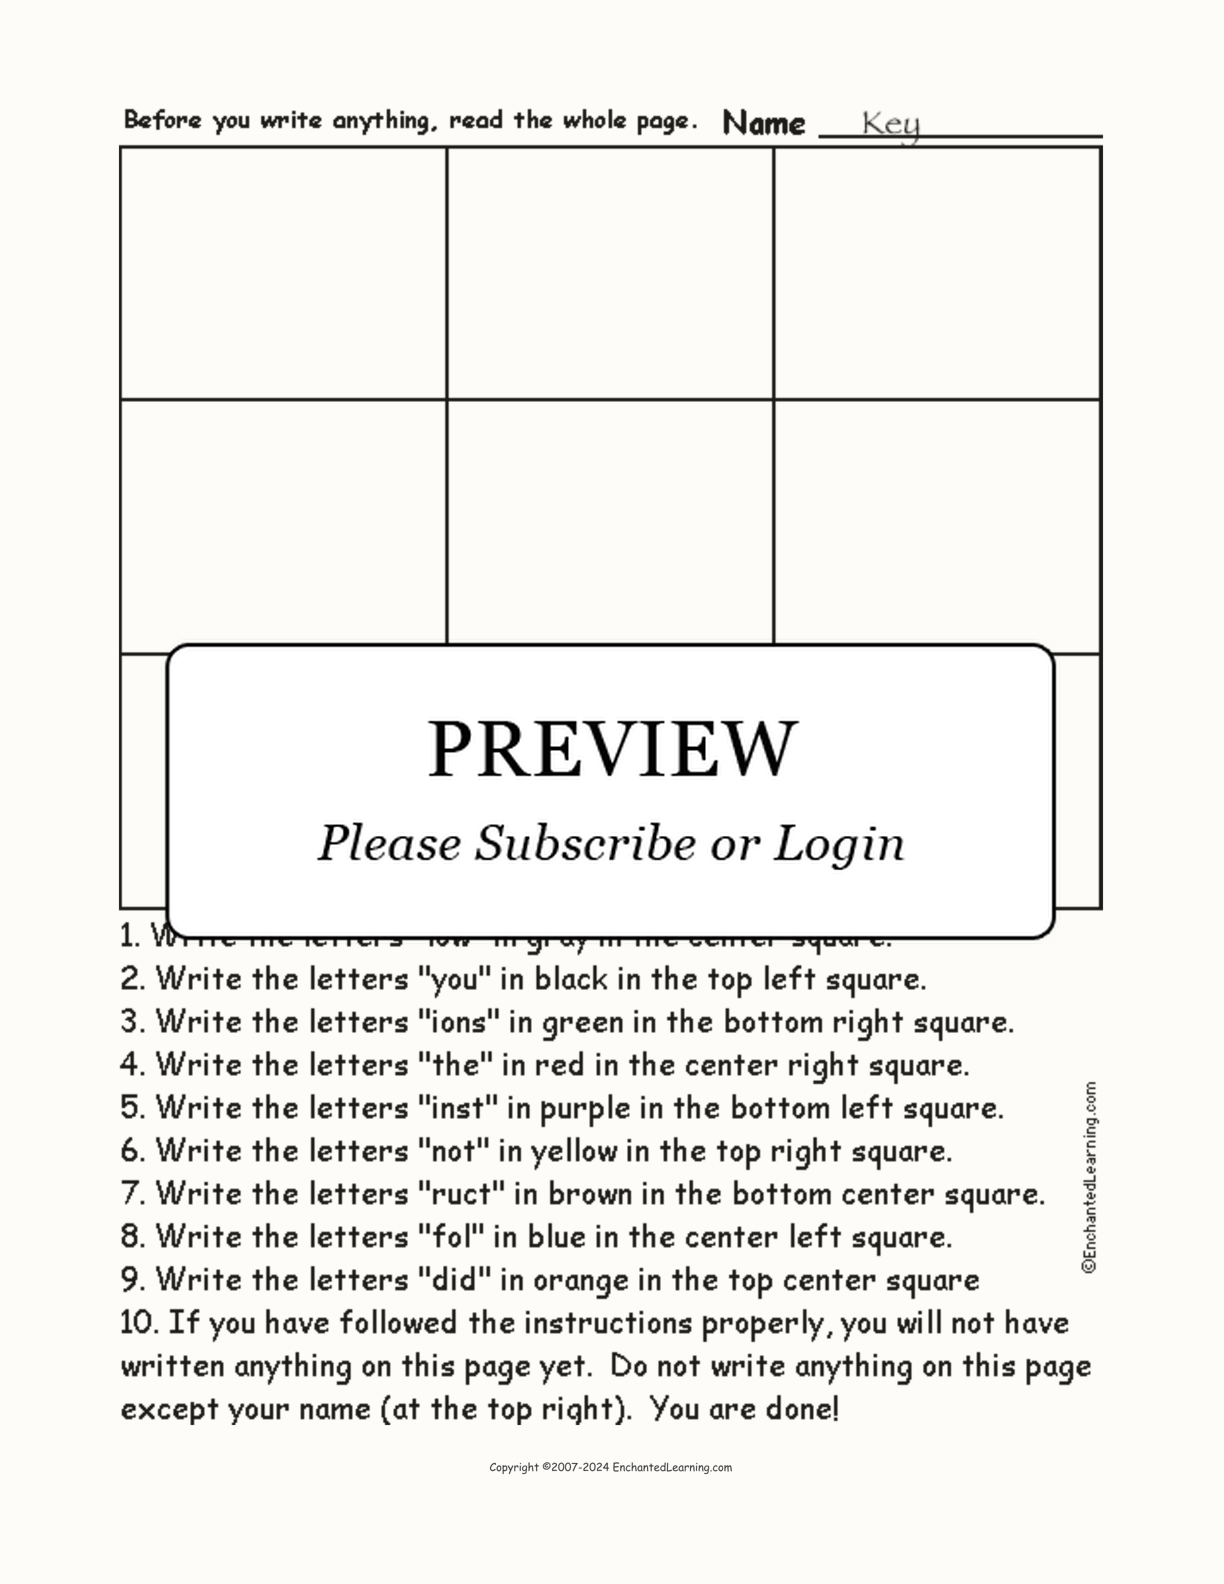 April Fool's Day - Follow the Instructions interactive worksheet page 2